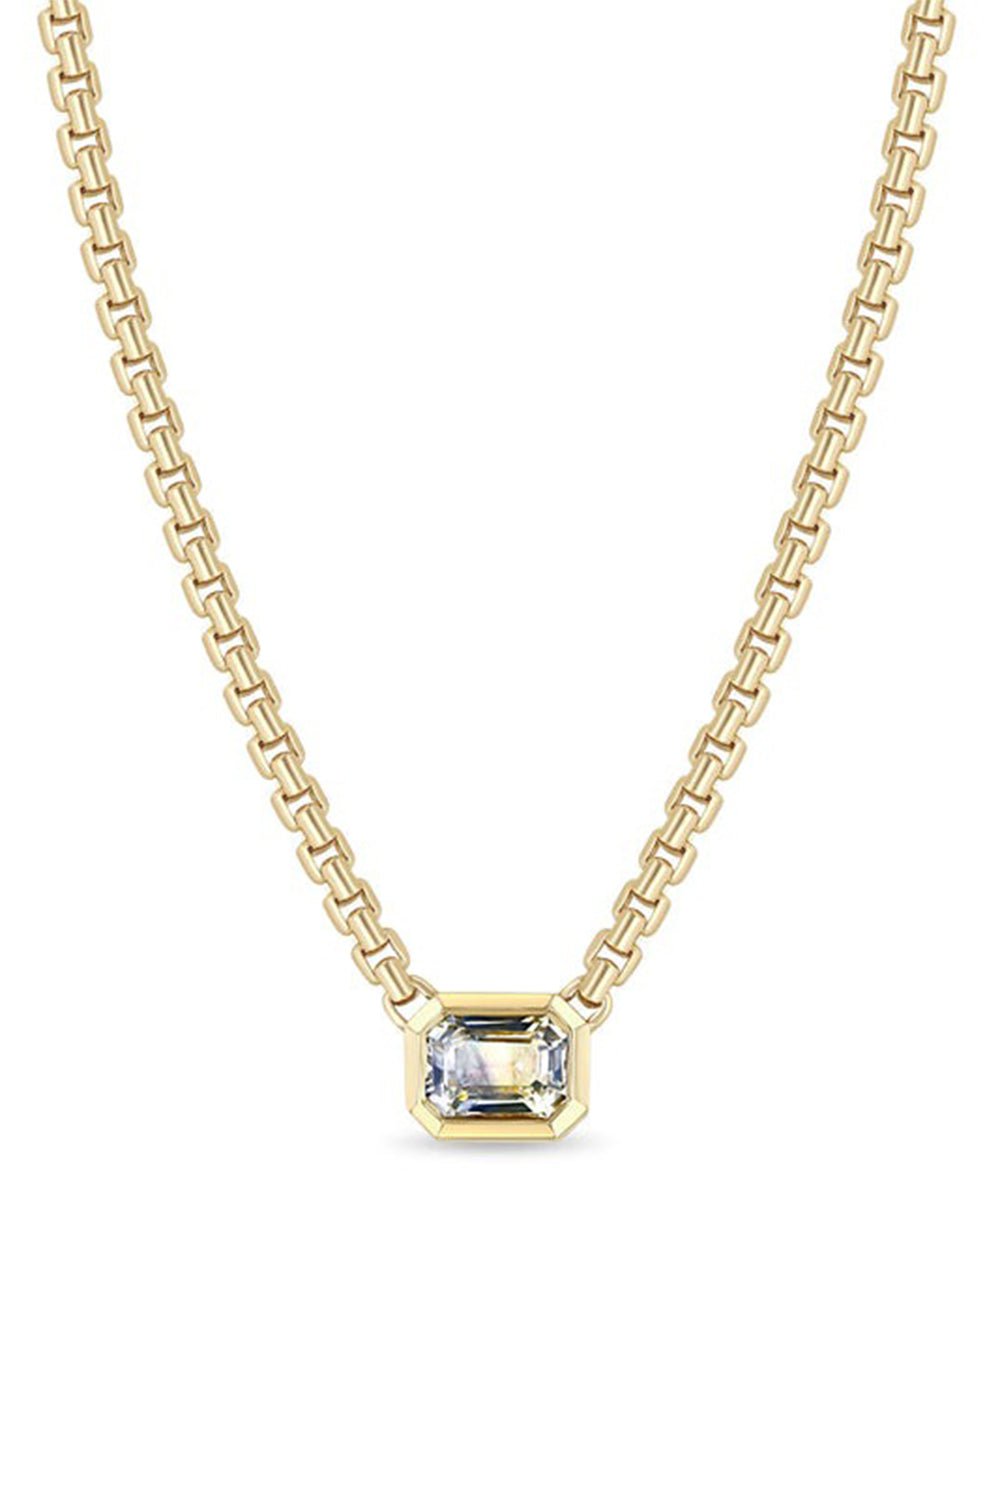 ZOE CHICCO-Sapphire Ombre Large Box Chain Necklace-YELLOW GOLD